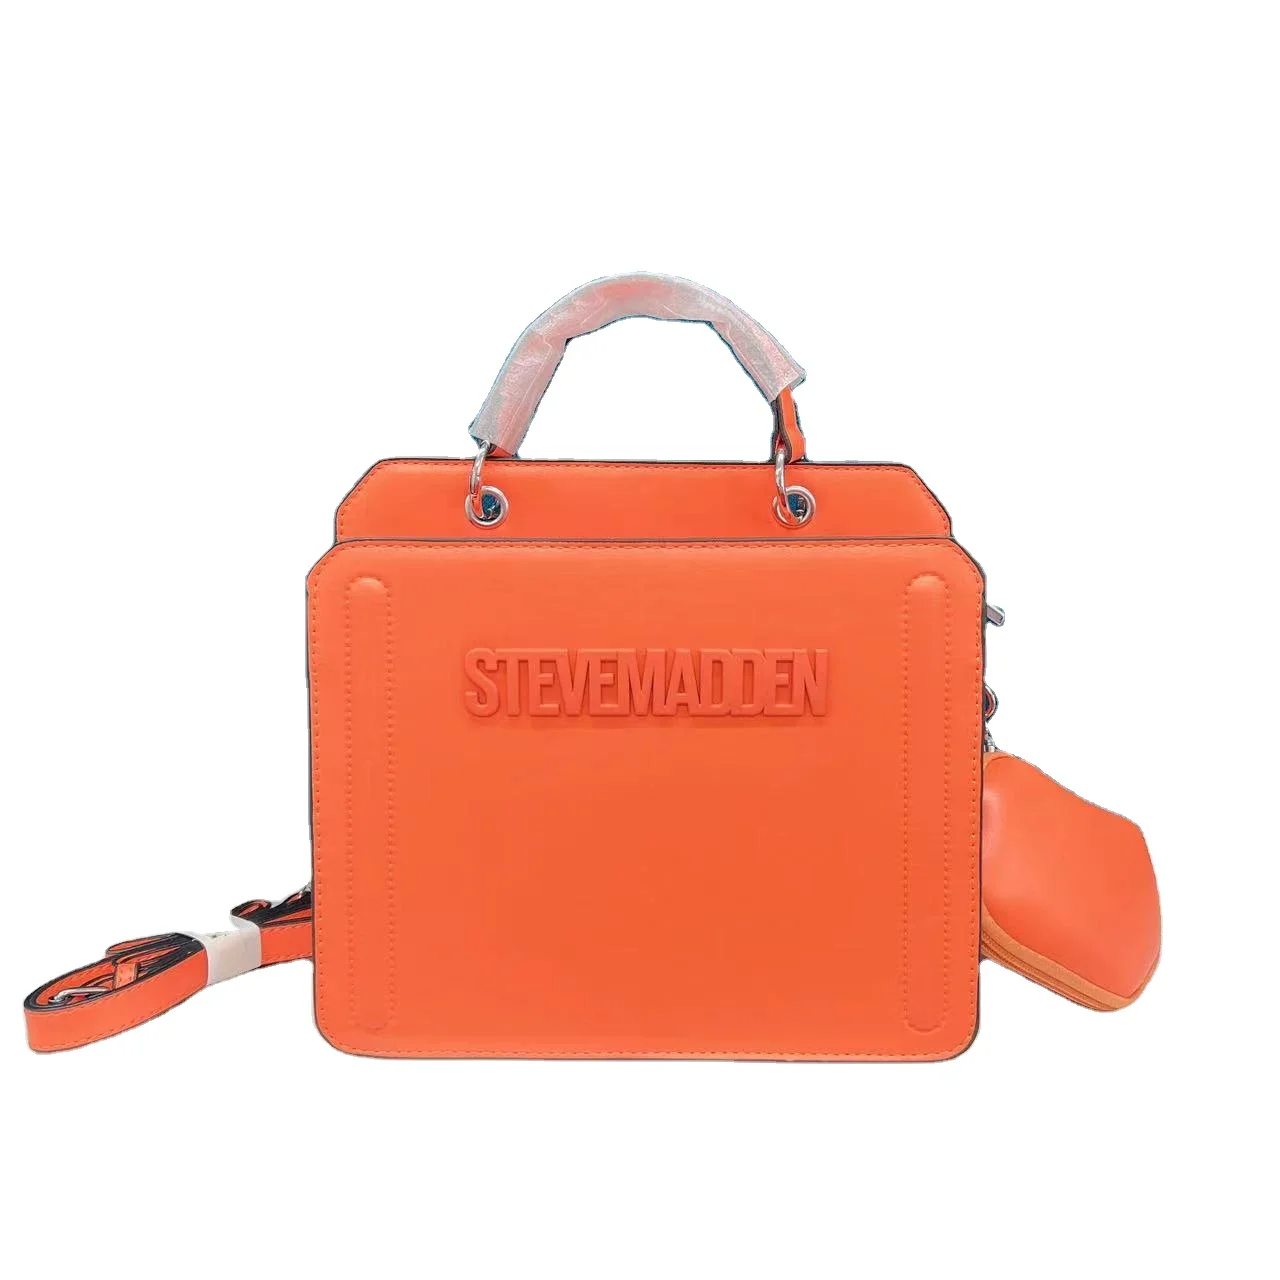 

New Arrival SM Purses Fashion Letter Steve Madden Handbags Women's Tote Bags Satchel Crossbody Bags, Depend on the products